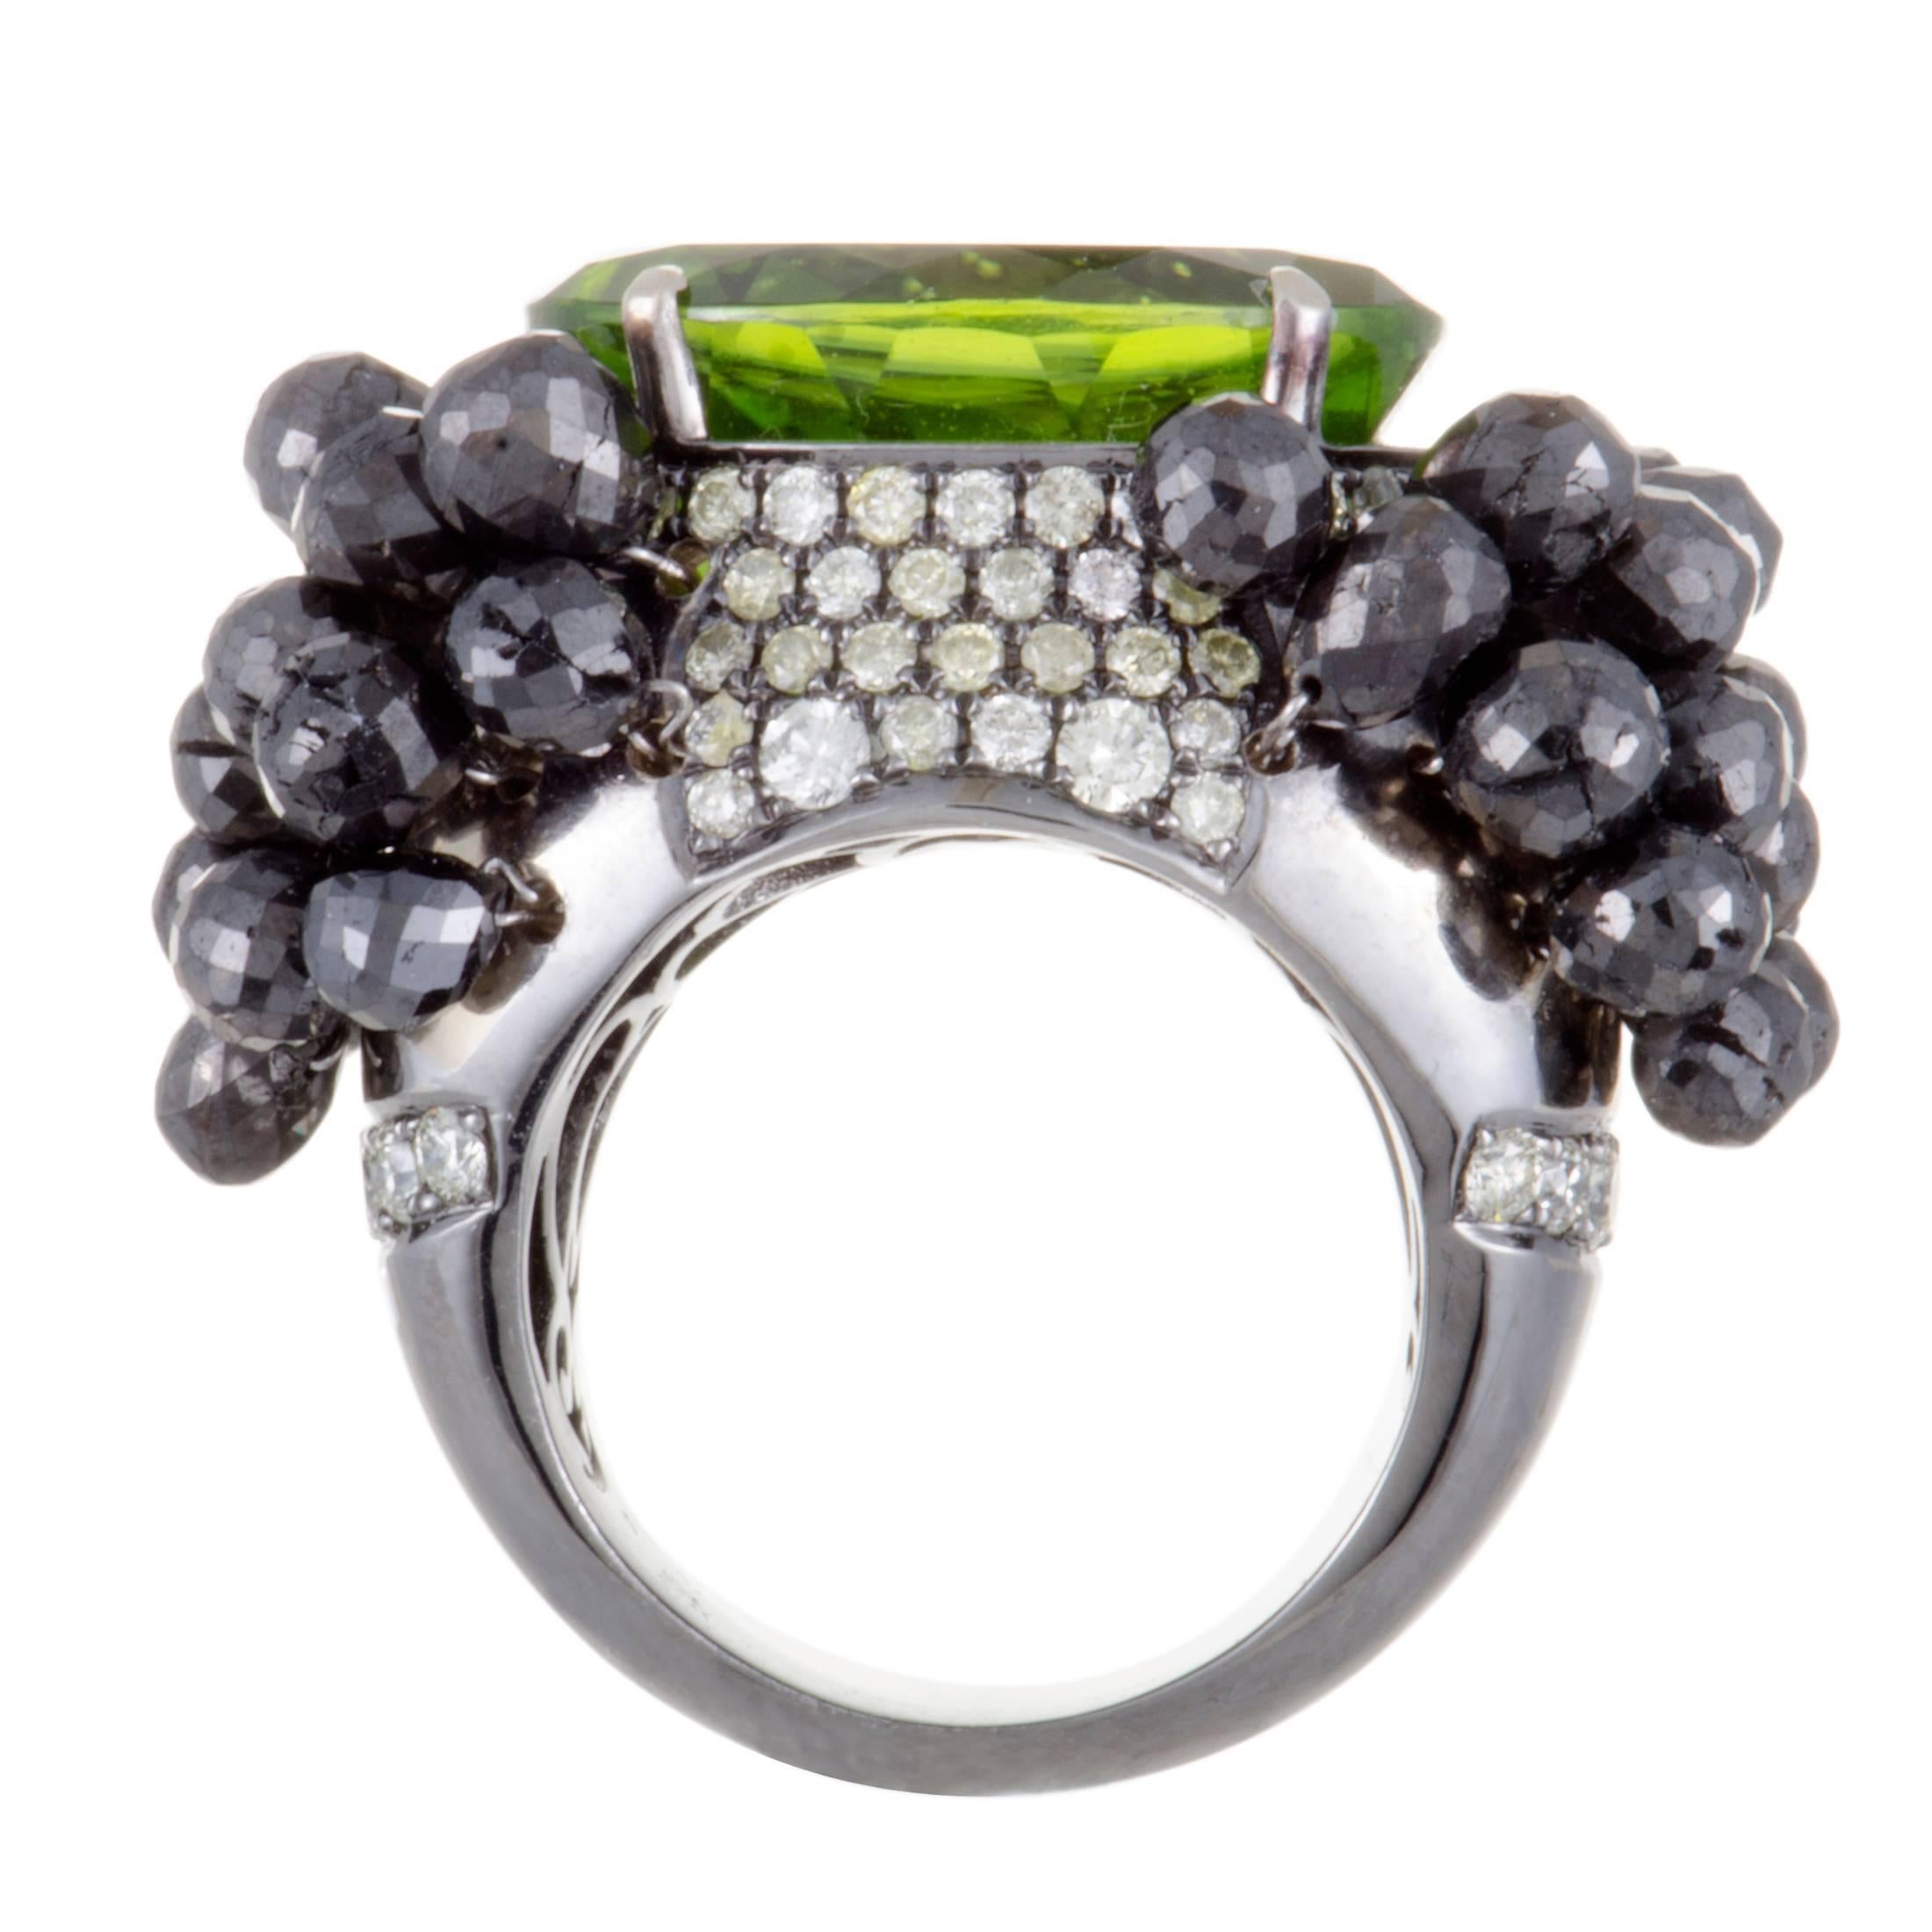 The compellingly offbeat appeal of black rhodium-plated 18K white gold is exquisitely complemented in this superb ring by an attractive blend of eye-catching gemstones. The central place is taken by a striking peridot that weighs 18.95 carats, and